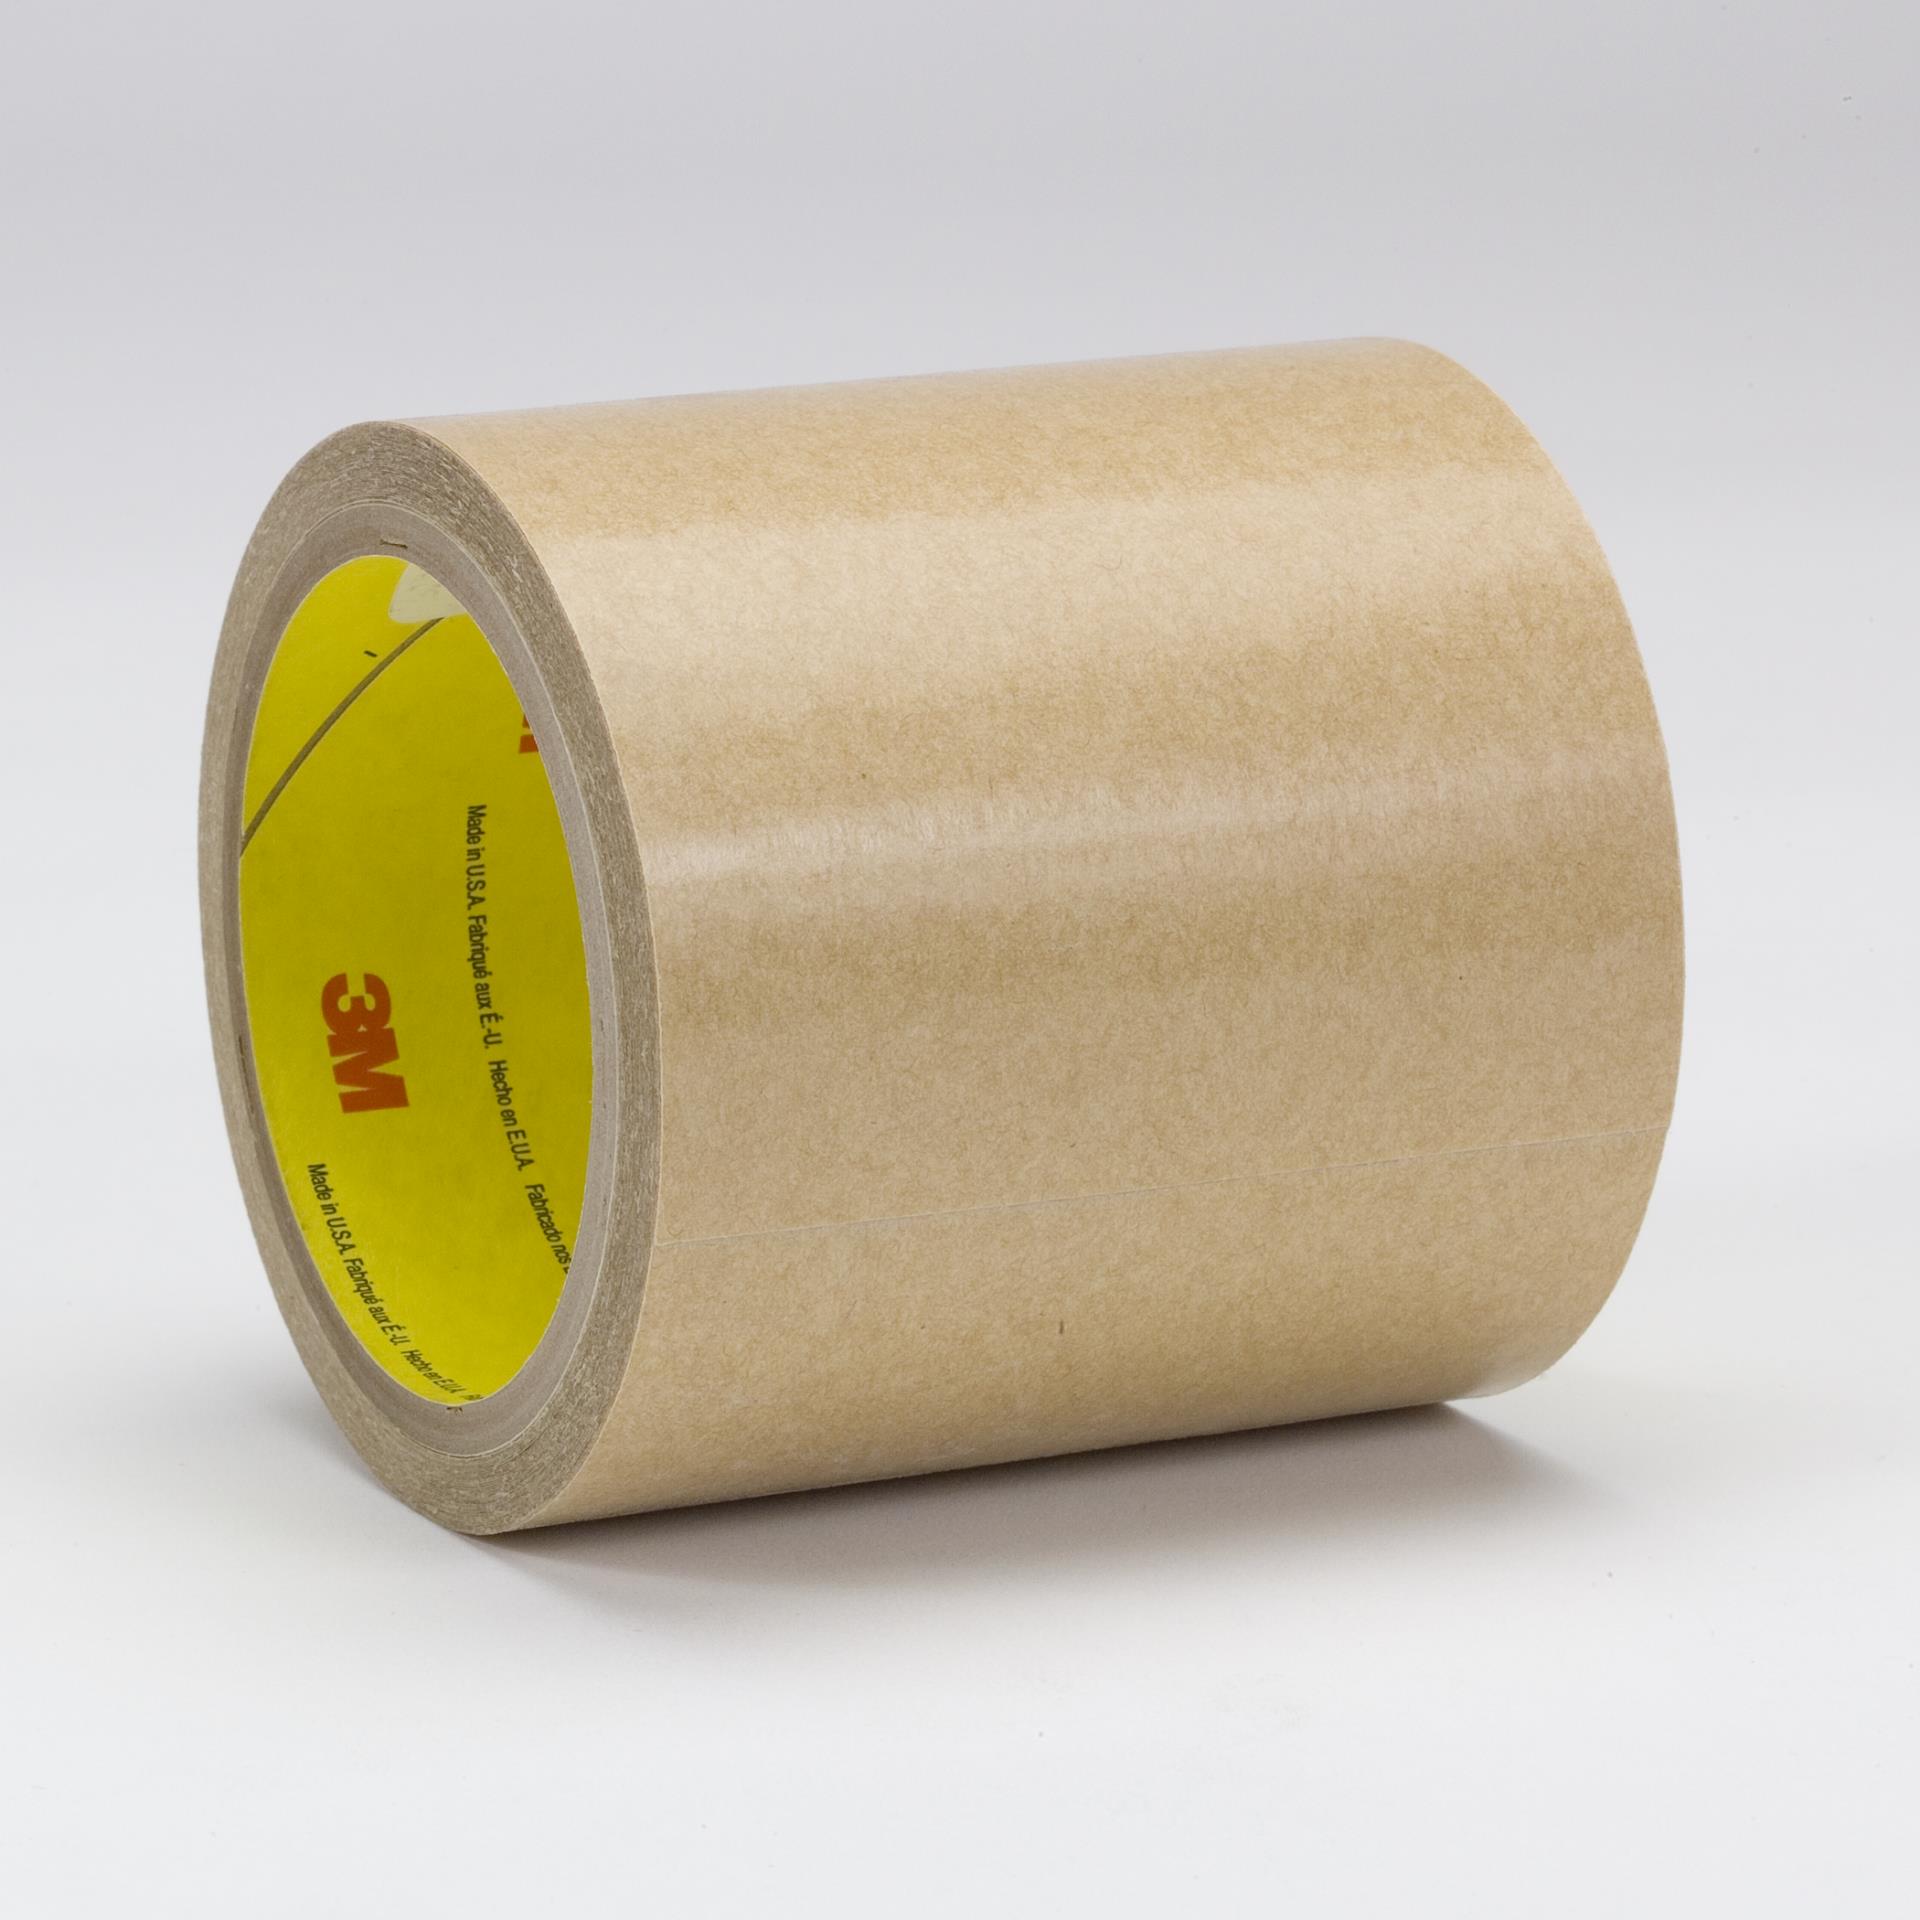 3M Scotch 9472LE 4" x 60 YDS Double Sided Adhesive Sheet Transfer Tape High Bond 